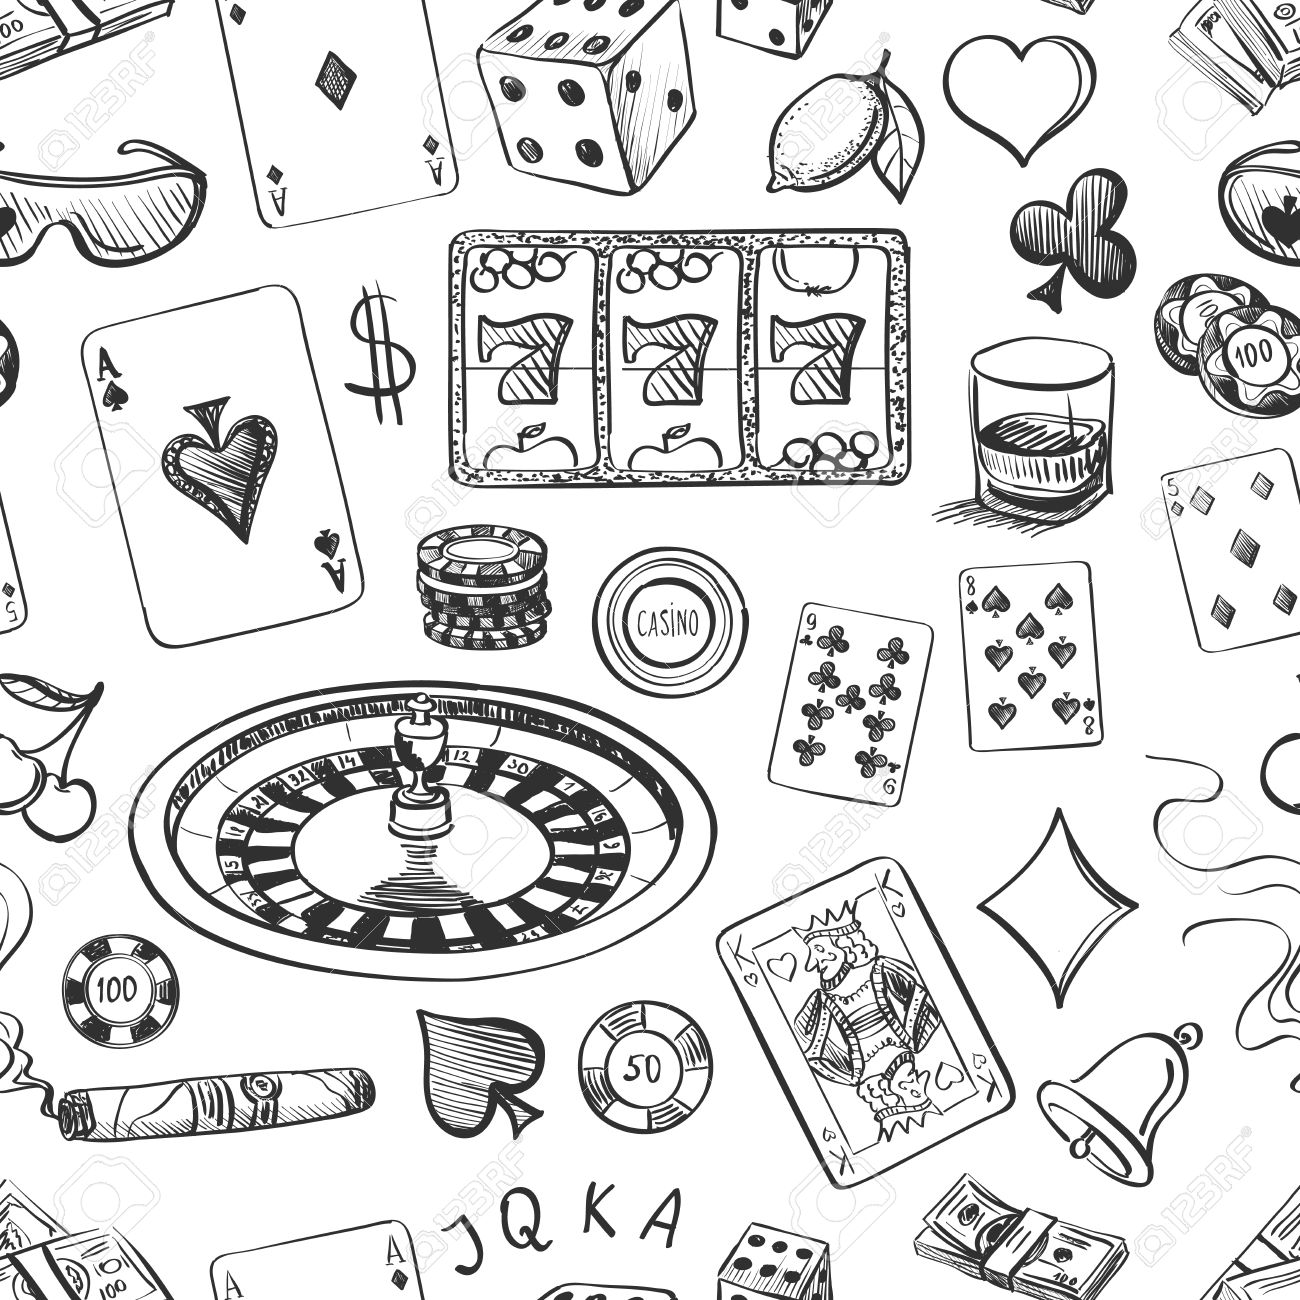 Poker Chip Drawing ~ Poker Chips Drawing At Paintingvalley.com ...